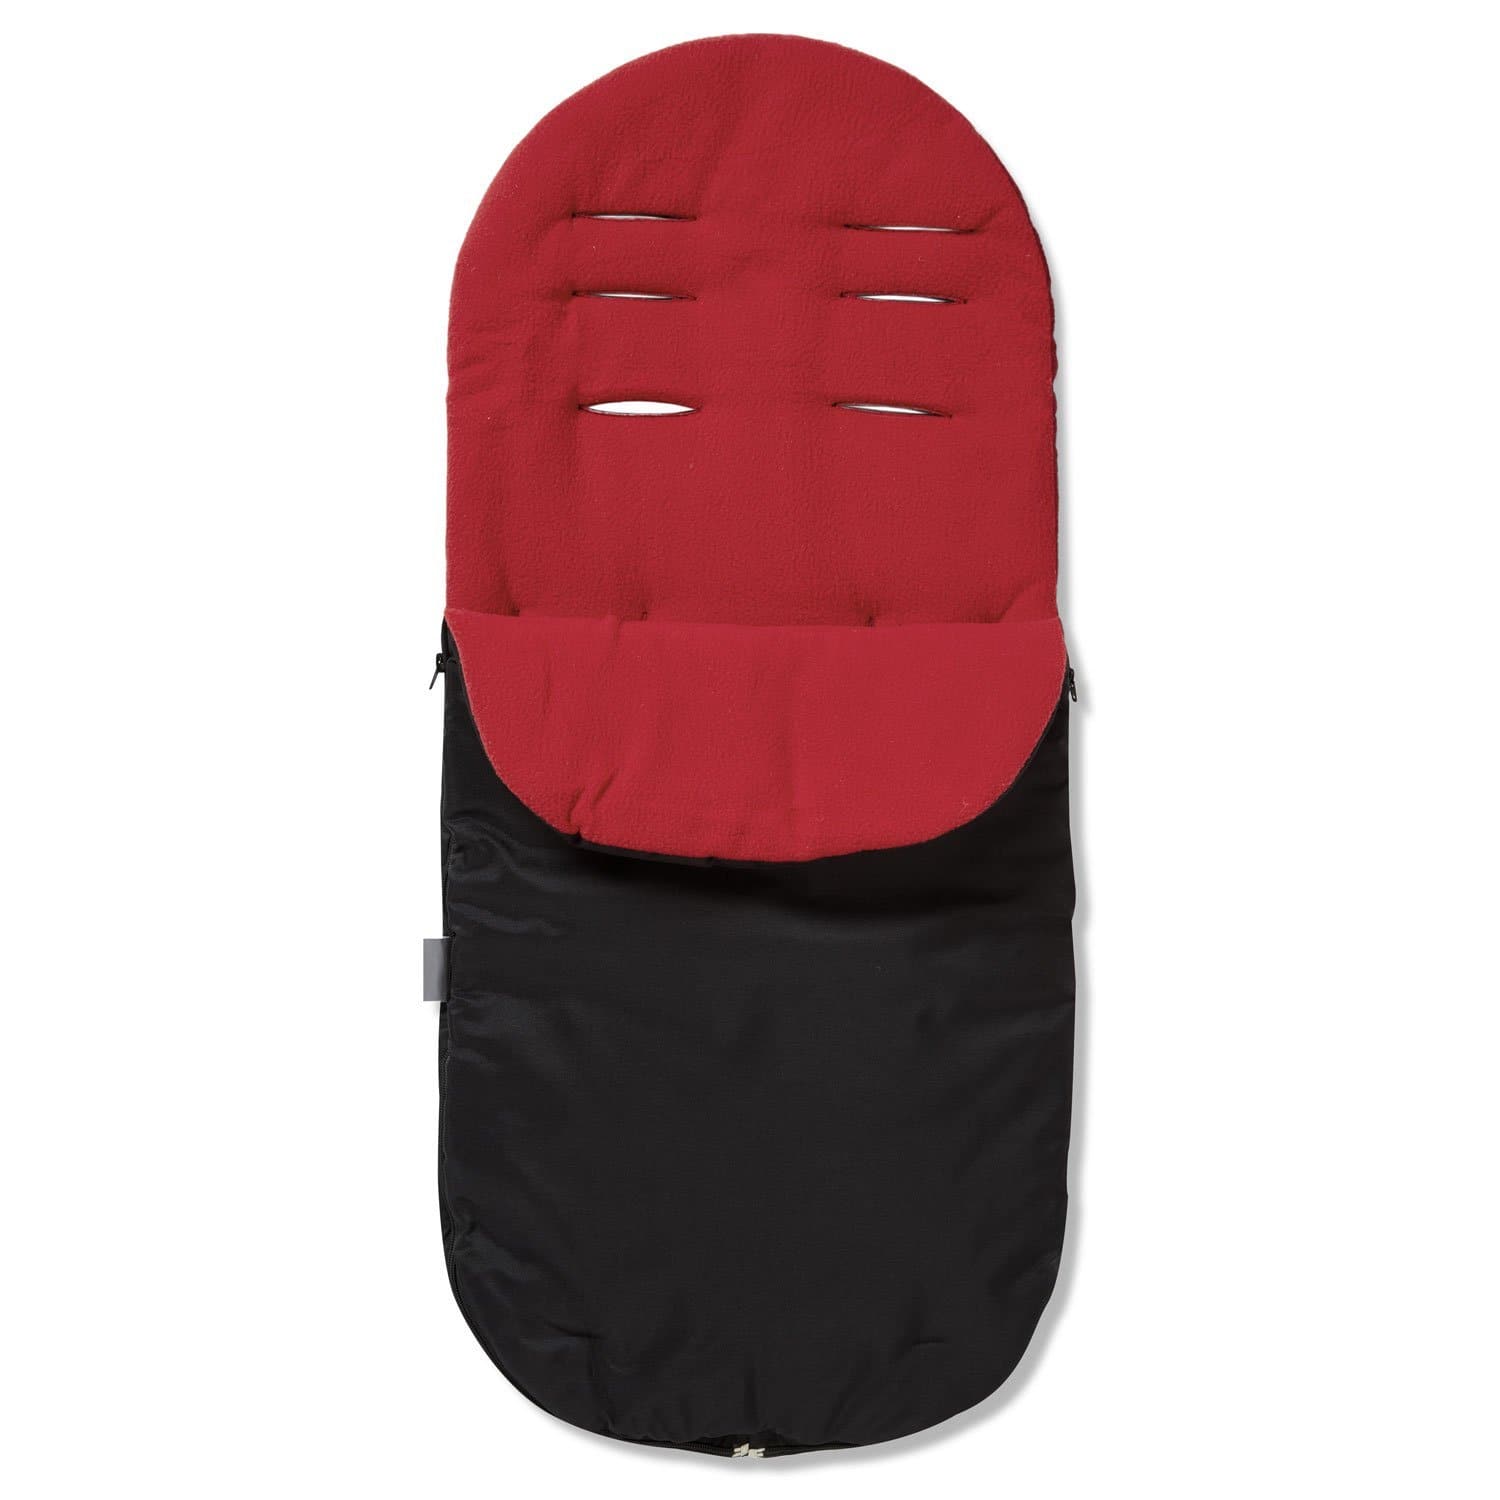 Footmuff / Cosy Toes Compatible with Babybus - Red / Fits All Models | For Your Little One